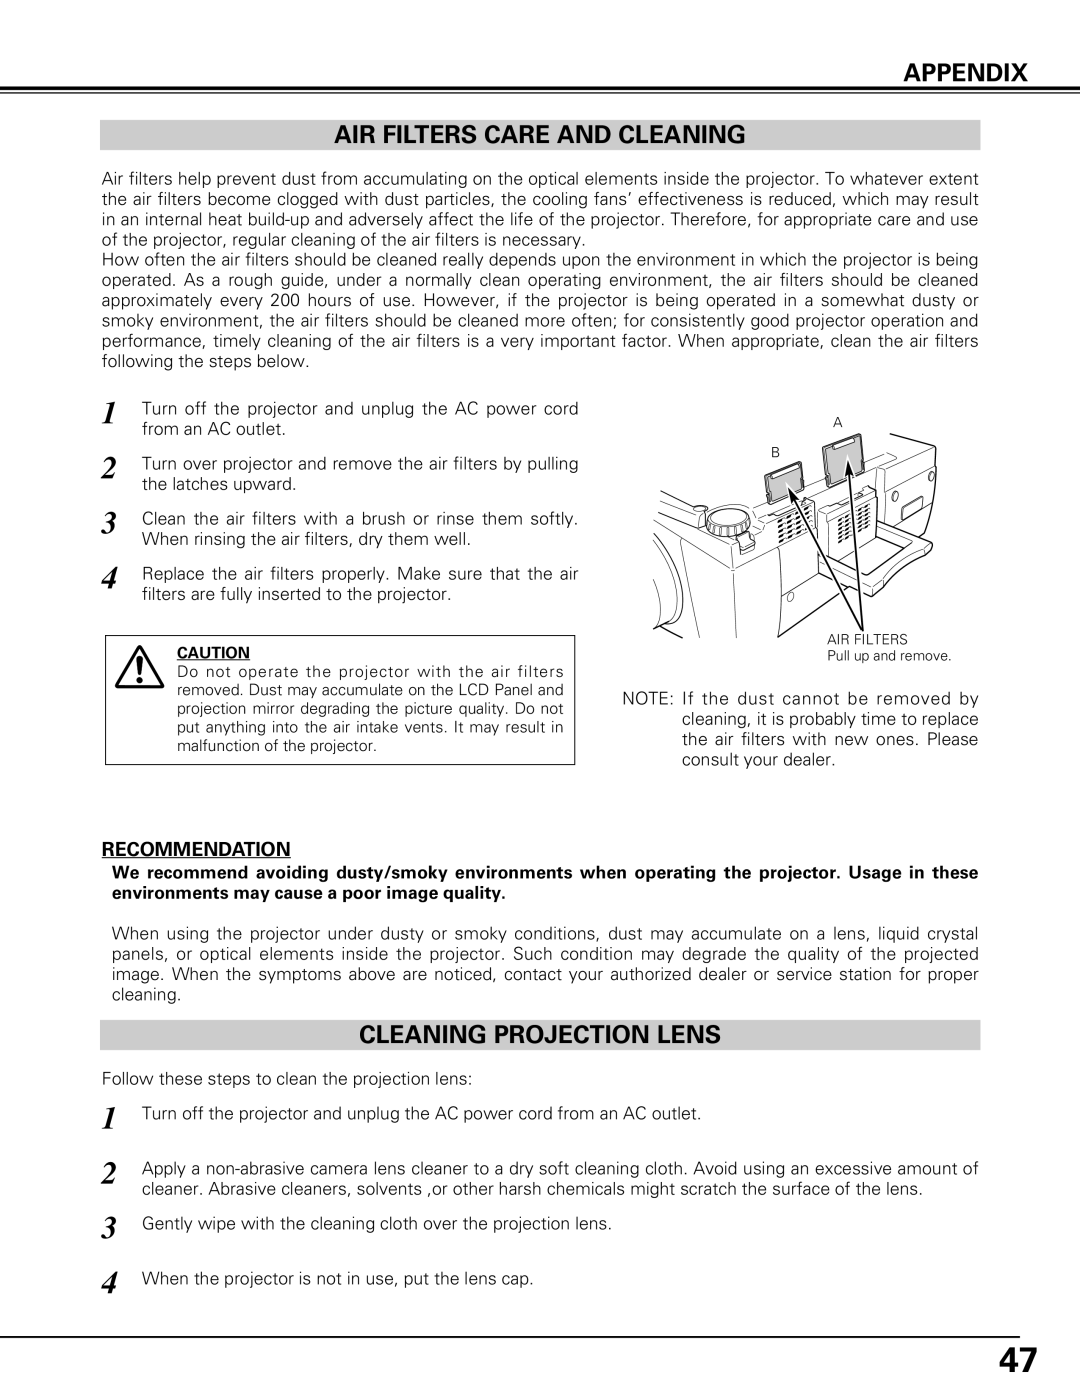 Canon LV-7575 user manual Appendix Air Filters Care And Cleaning, Cleaning Projection Lens, Recommendation 